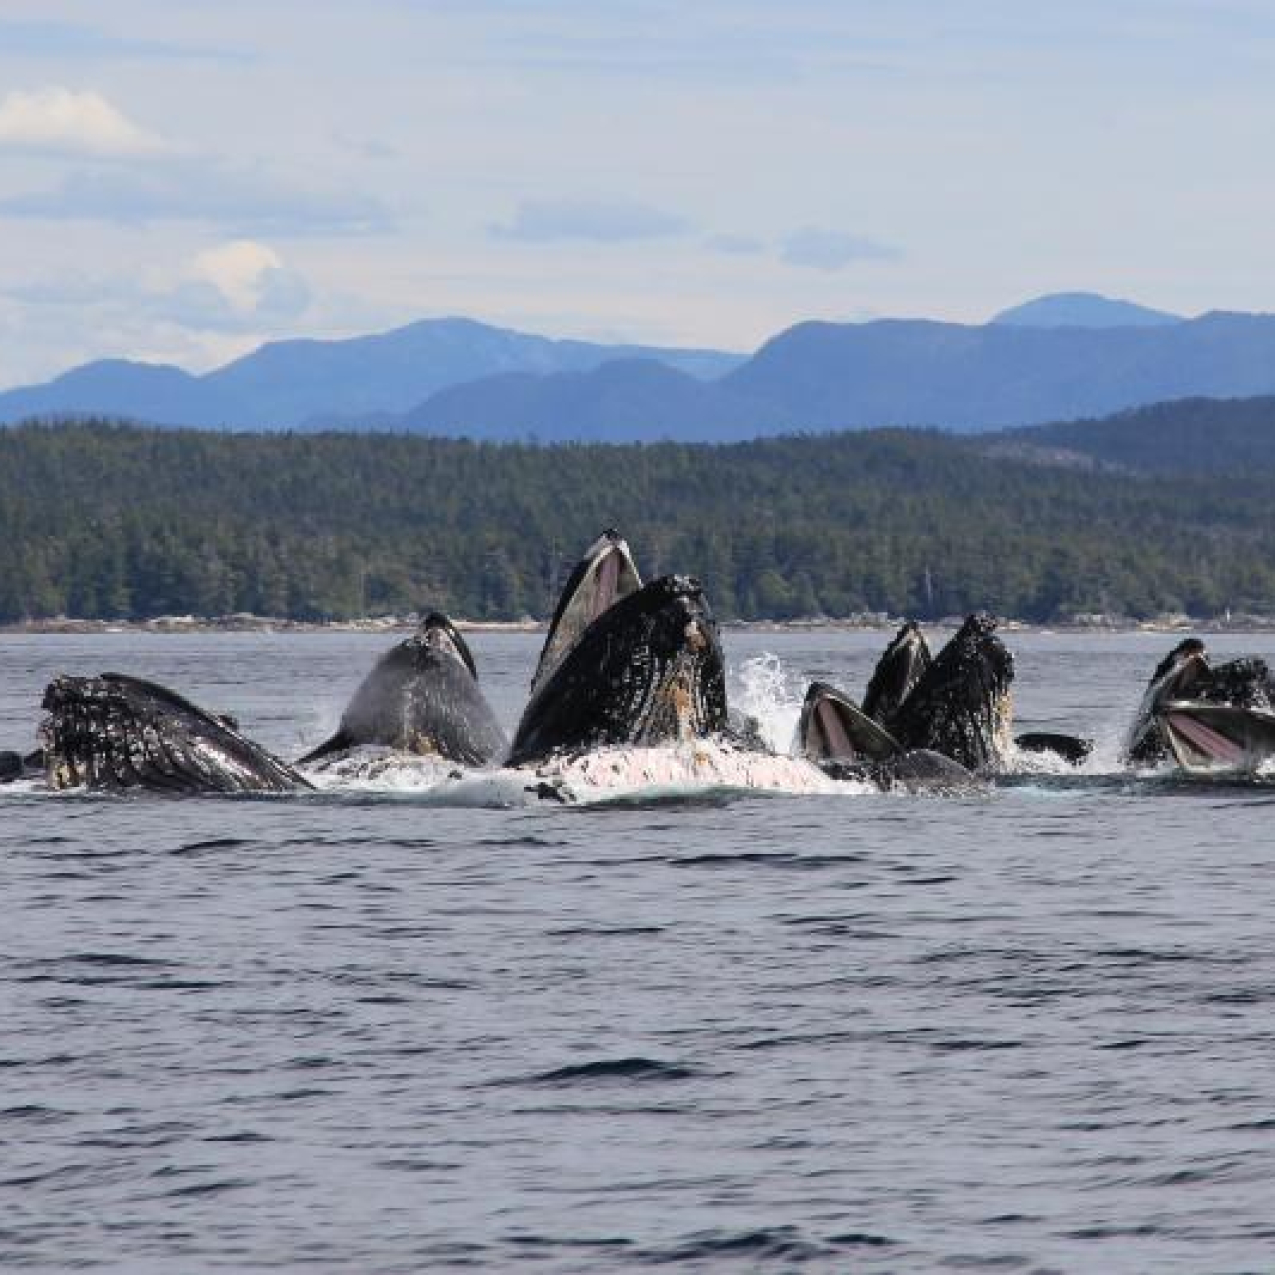 Humpback whales bursting through the surface with mouths open to catch fish to eat.